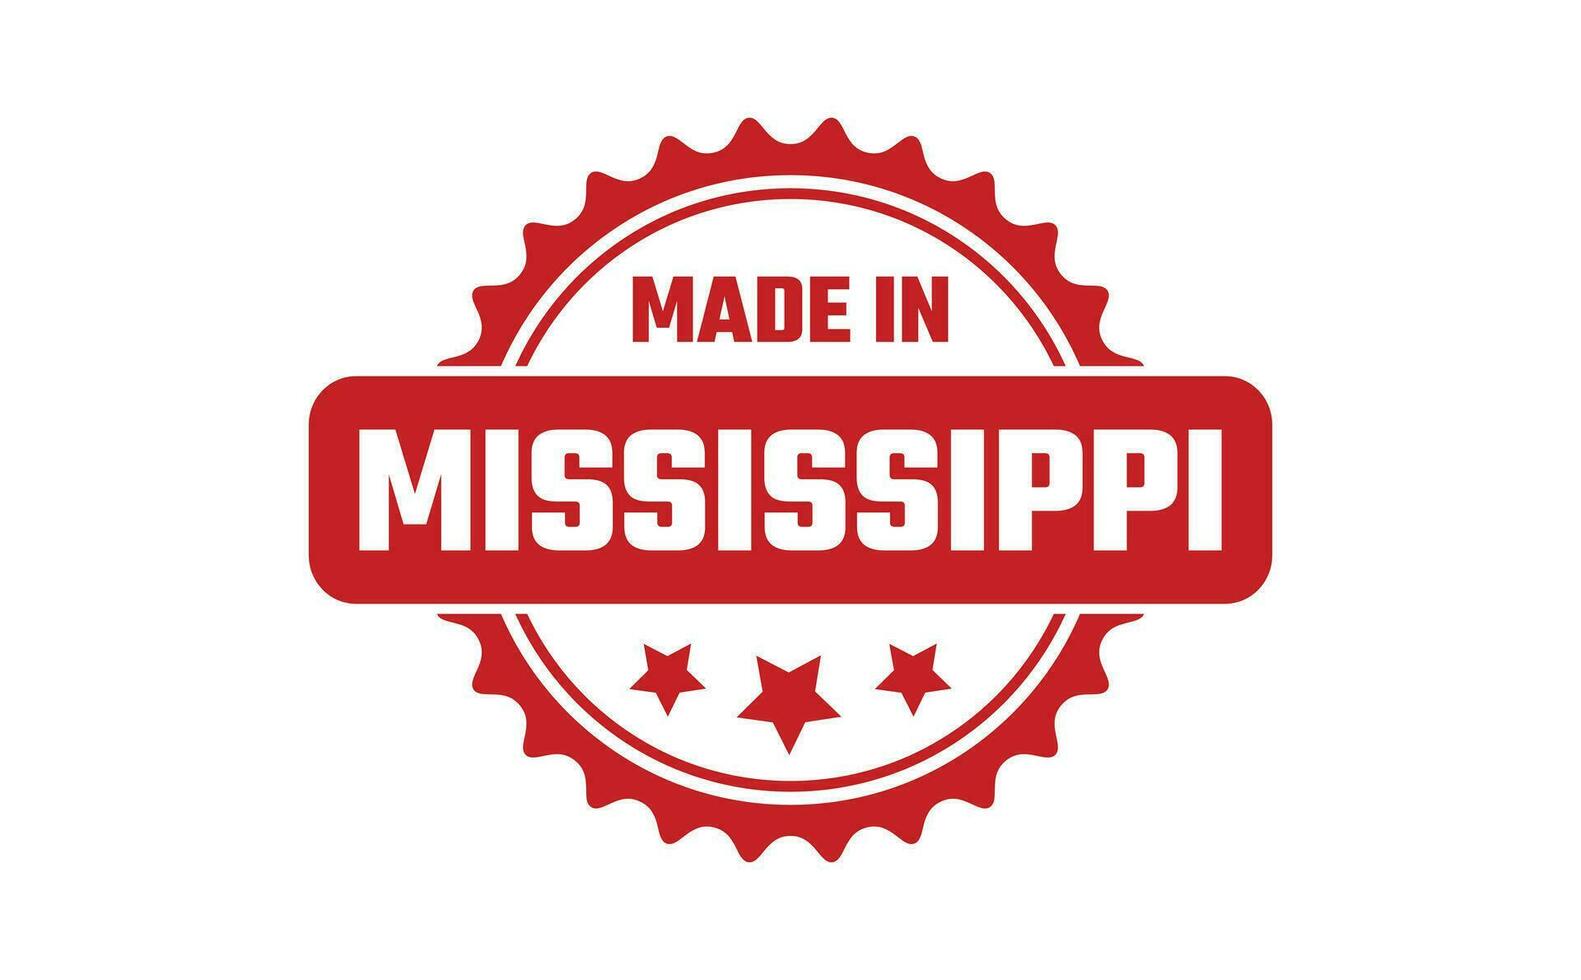 Made In Mississippi Rubber Stamp vector